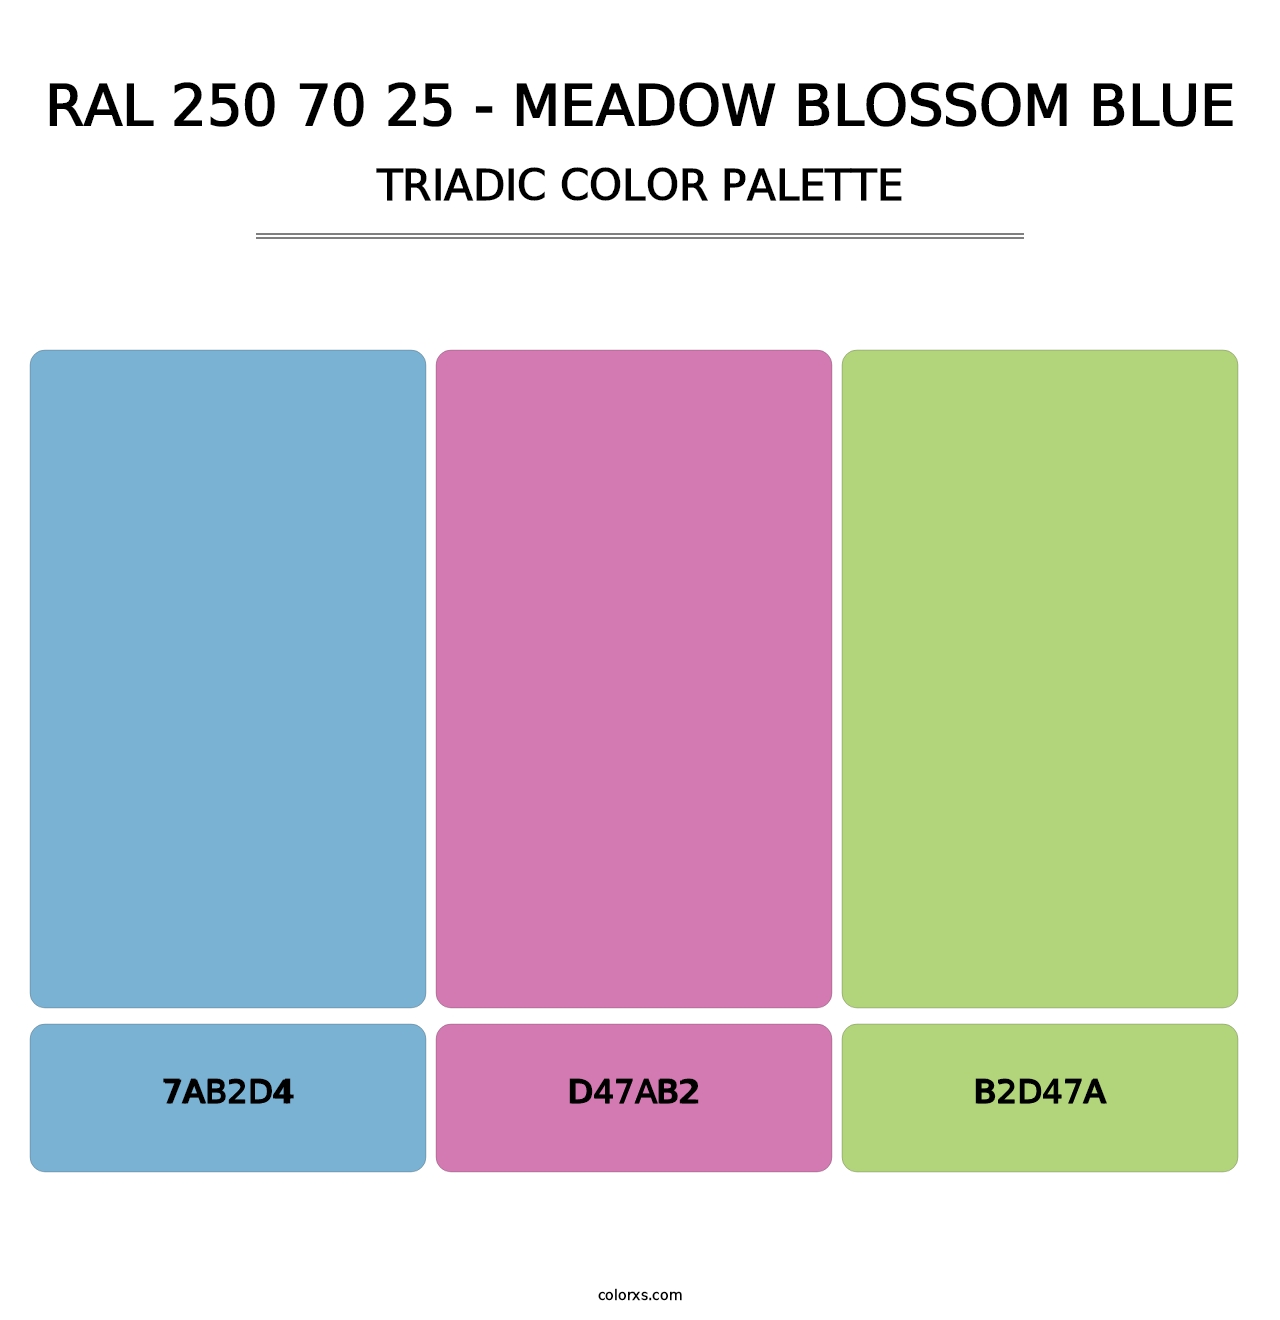 RAL 250 70 25 - Meadow Blossom Blue - Triadic Color Palette